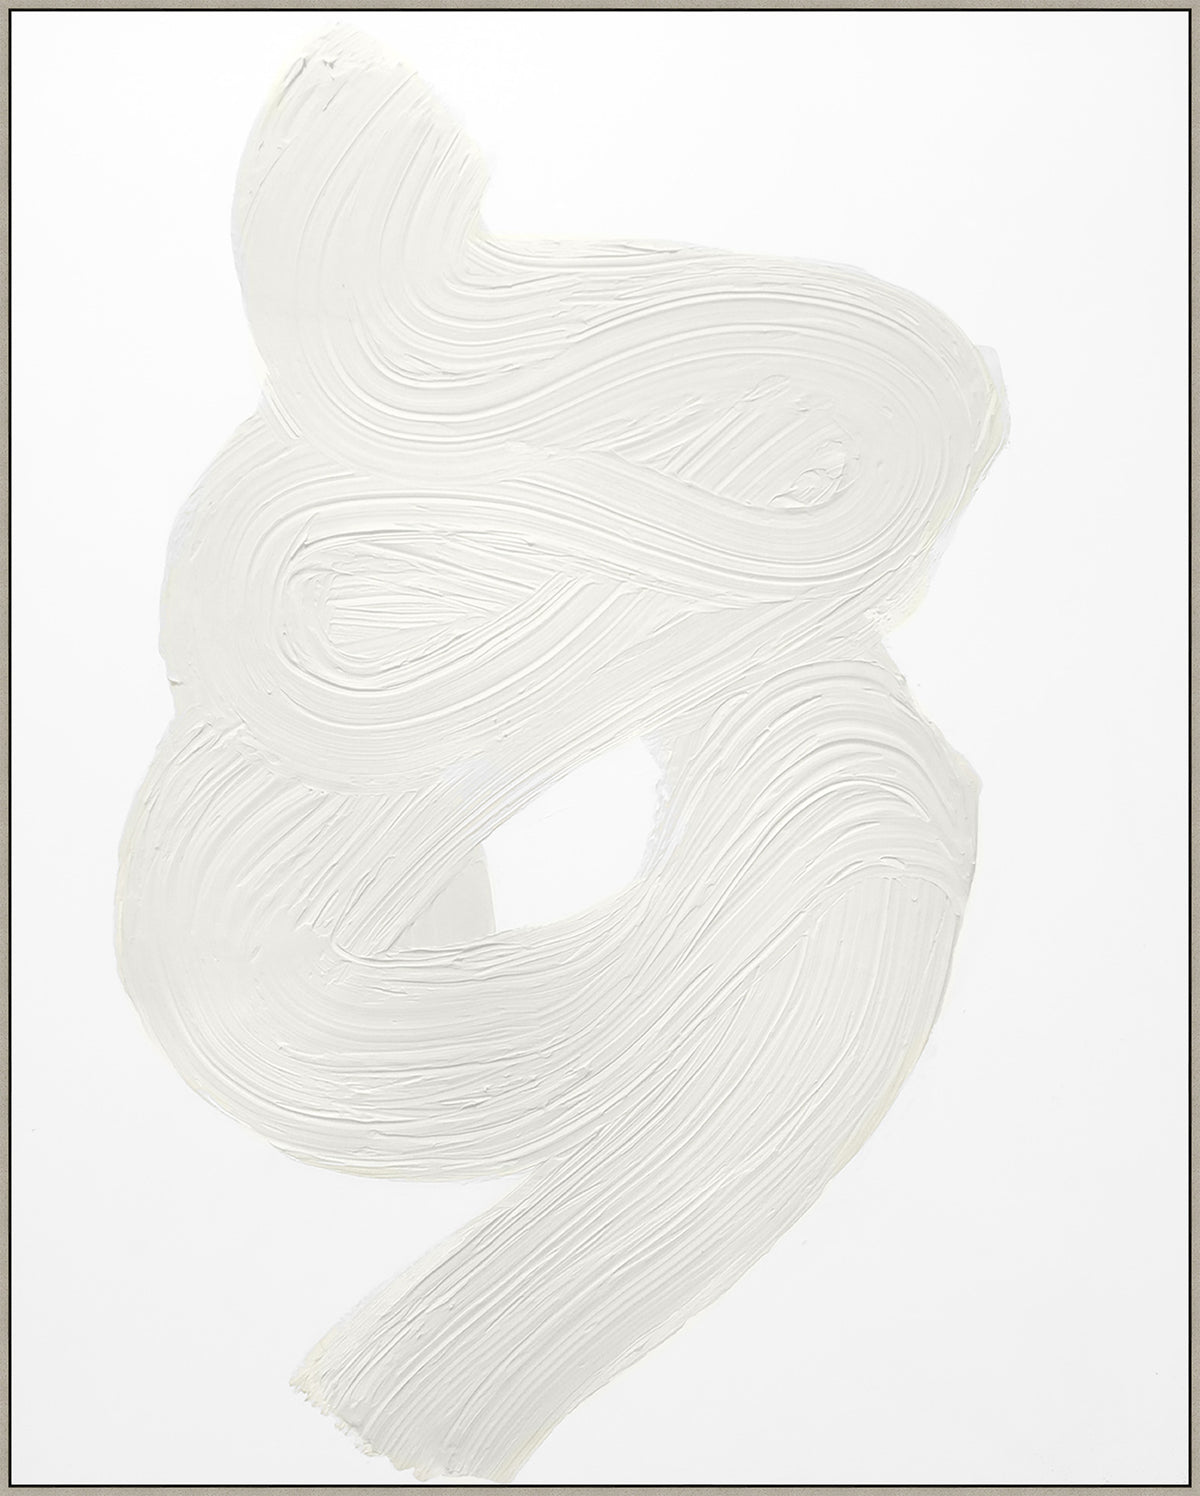 Neutral Swirl 2 abstract art by Thom Filicia